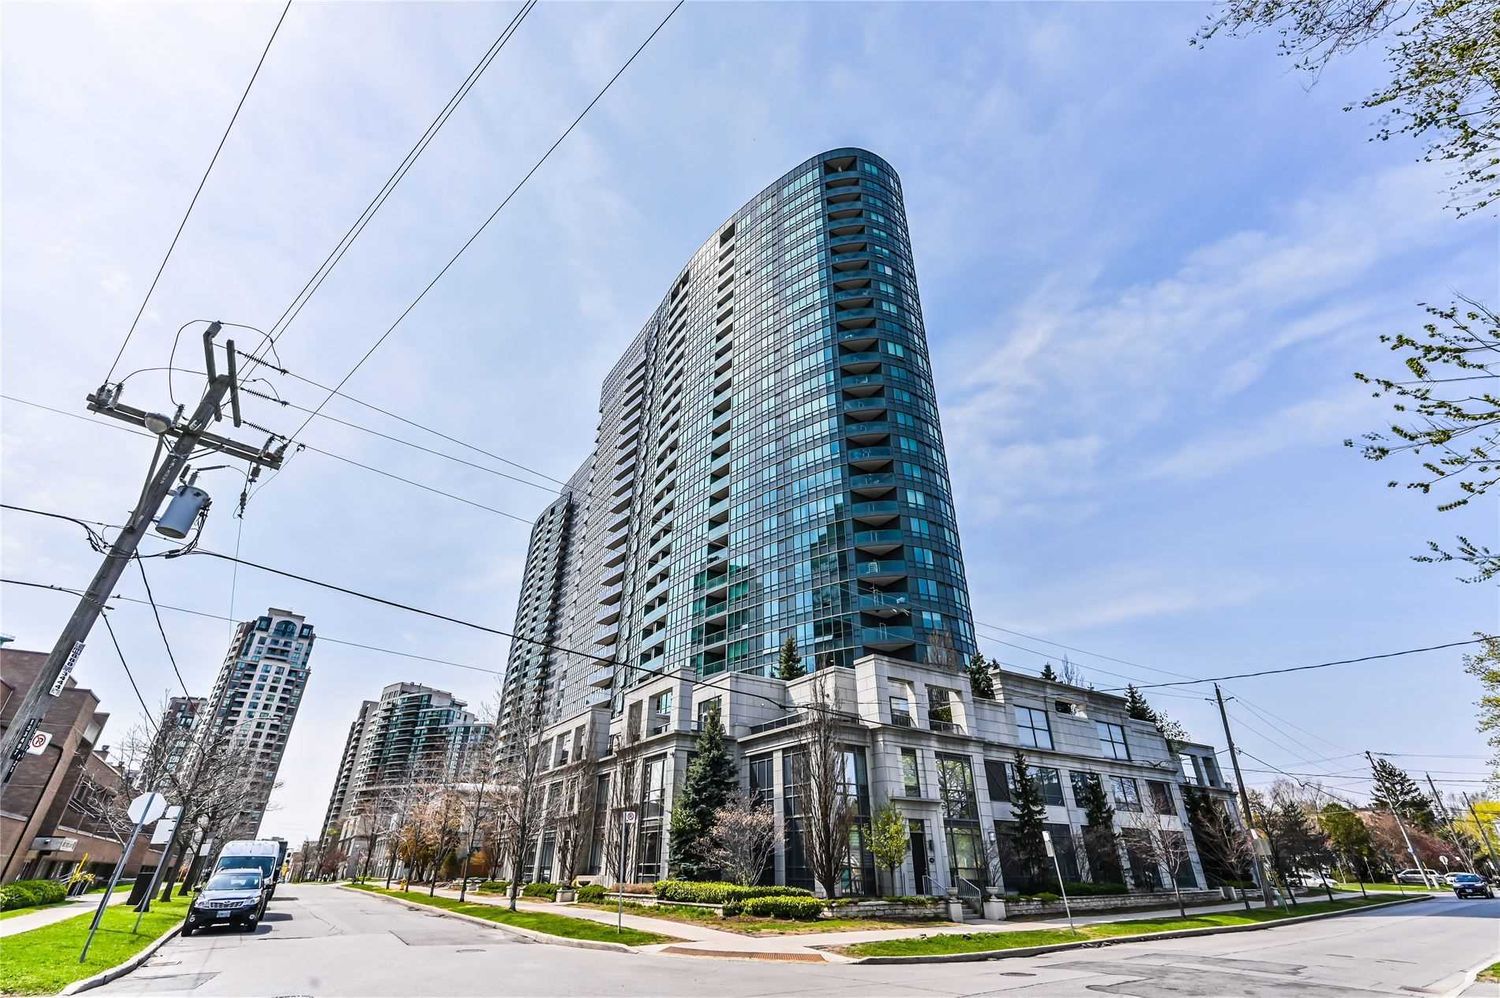 25-43 Greenview Avenue. Meridian II Condos is located in  North York, Toronto - image #3 of 3